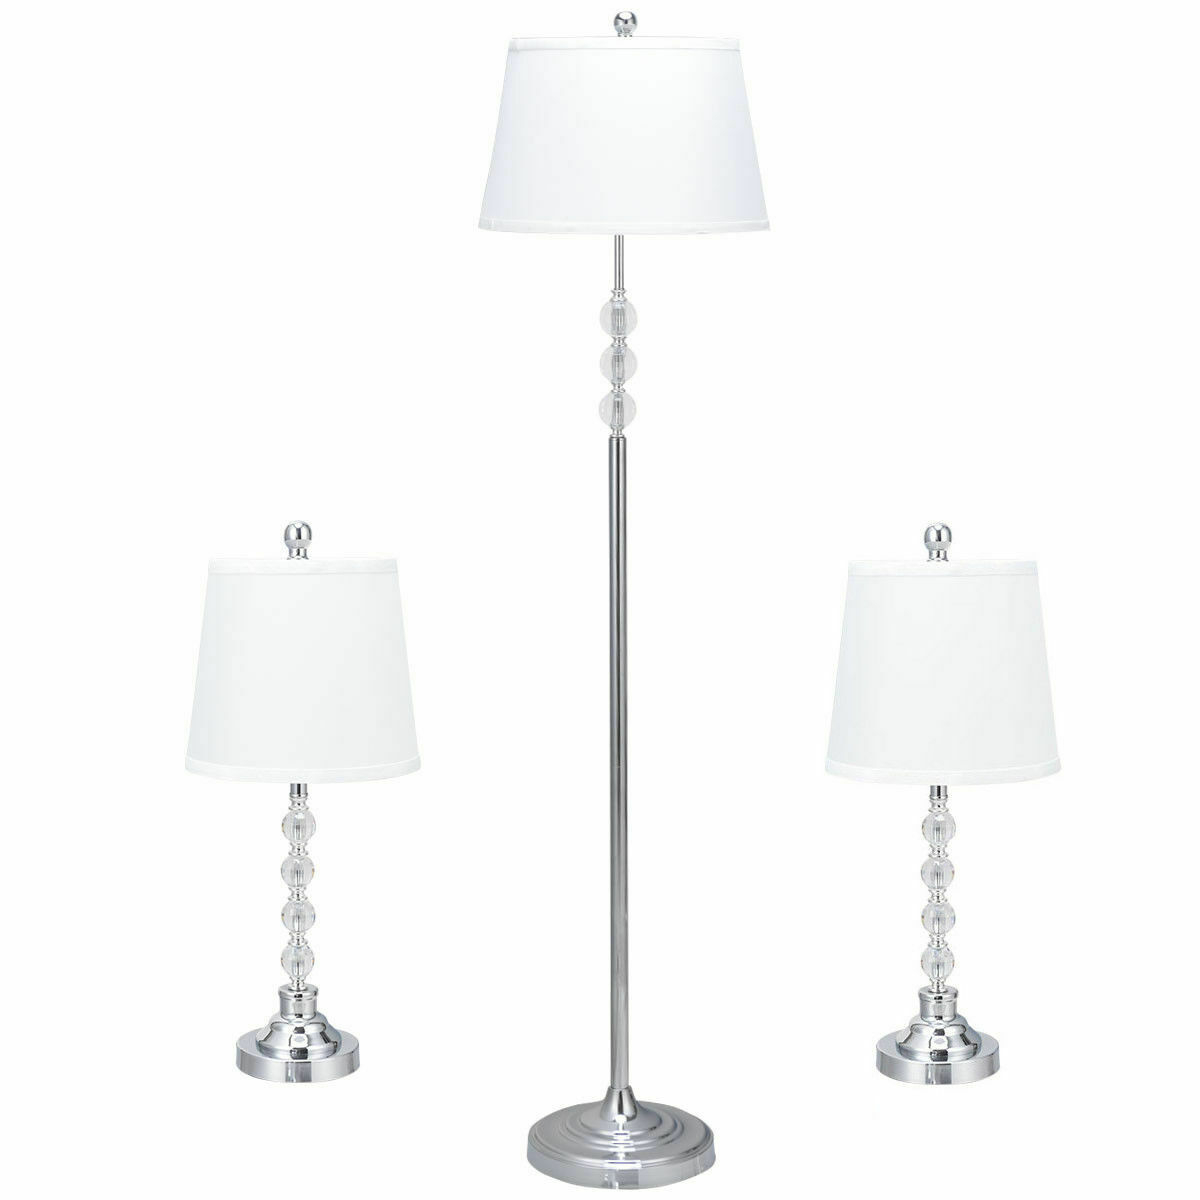 3 Piece Lamp Set 2 Table Lamps 1 Floor Lamp Chrome Finished Modern Home Bedroom regarding sizing 1200 X 1200